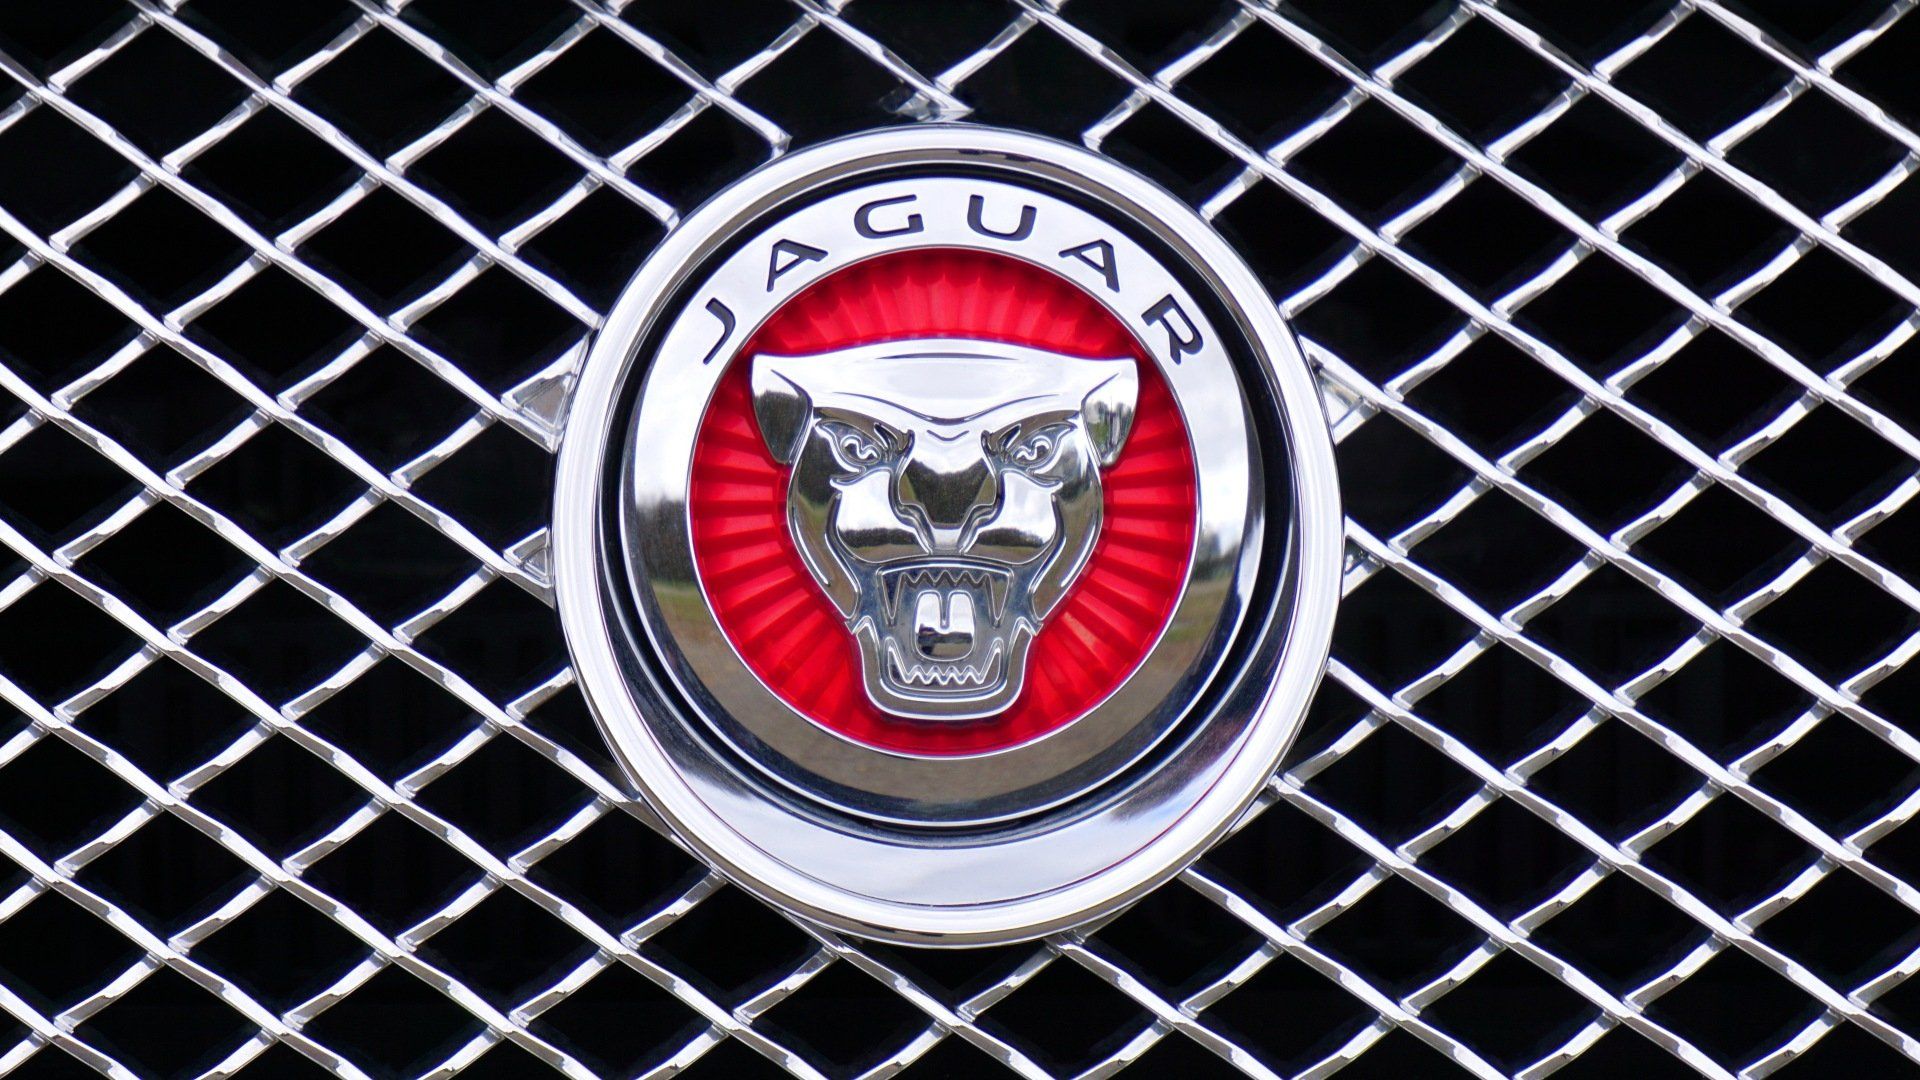 A close up of a jaguar logo on the front of a car